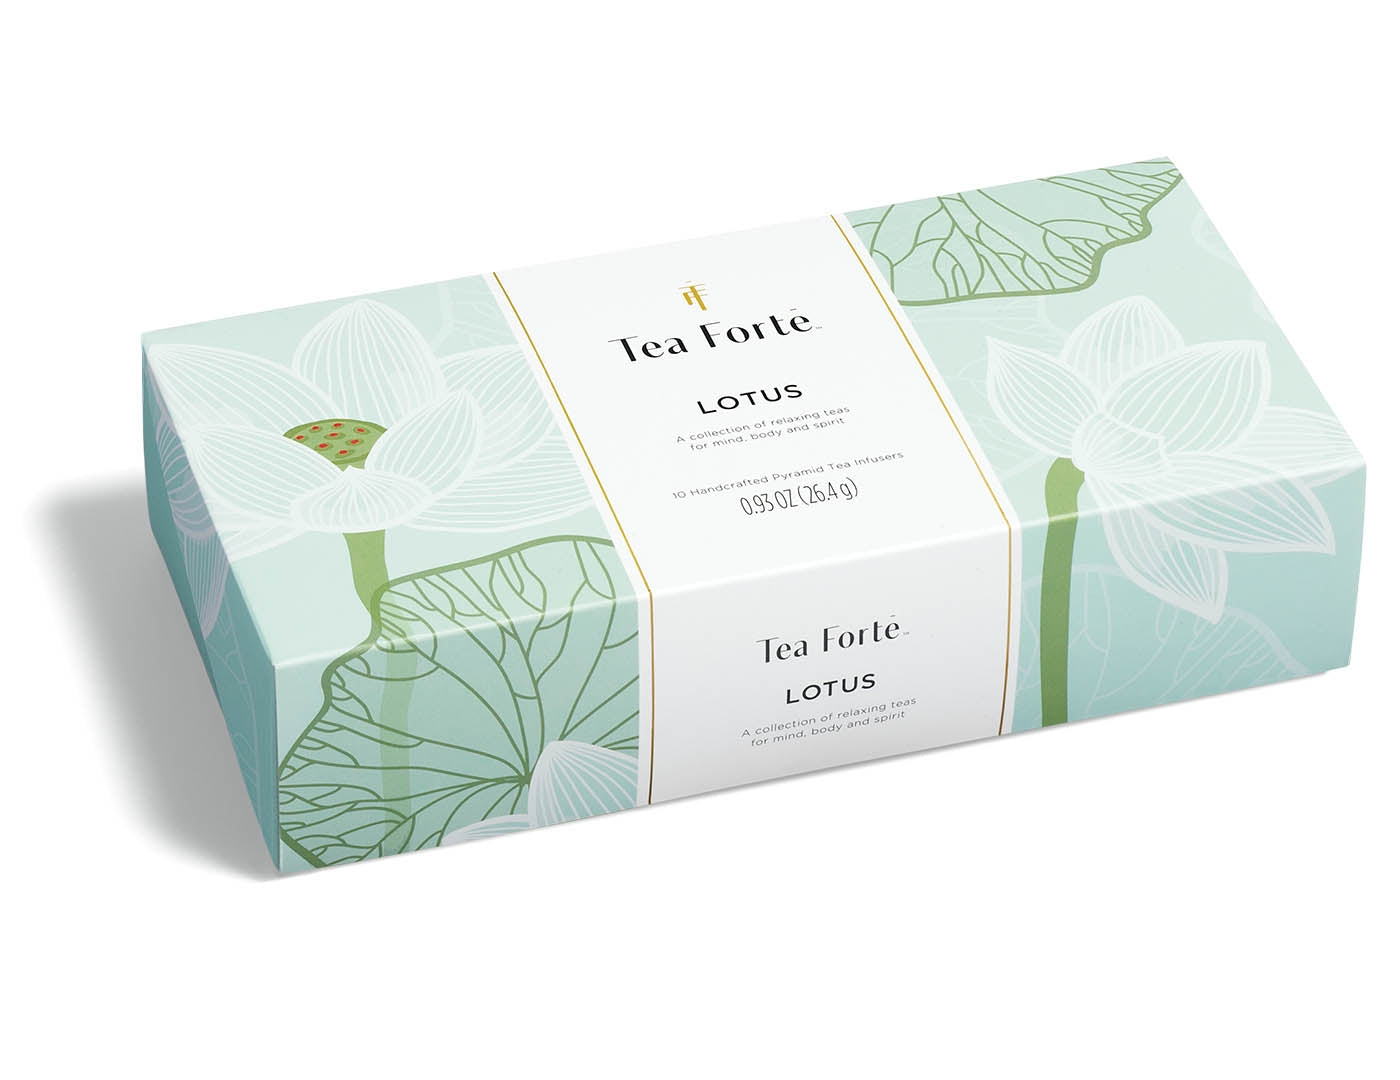 Lotus tea assortment in a 10 count petite presentation box with lid closed